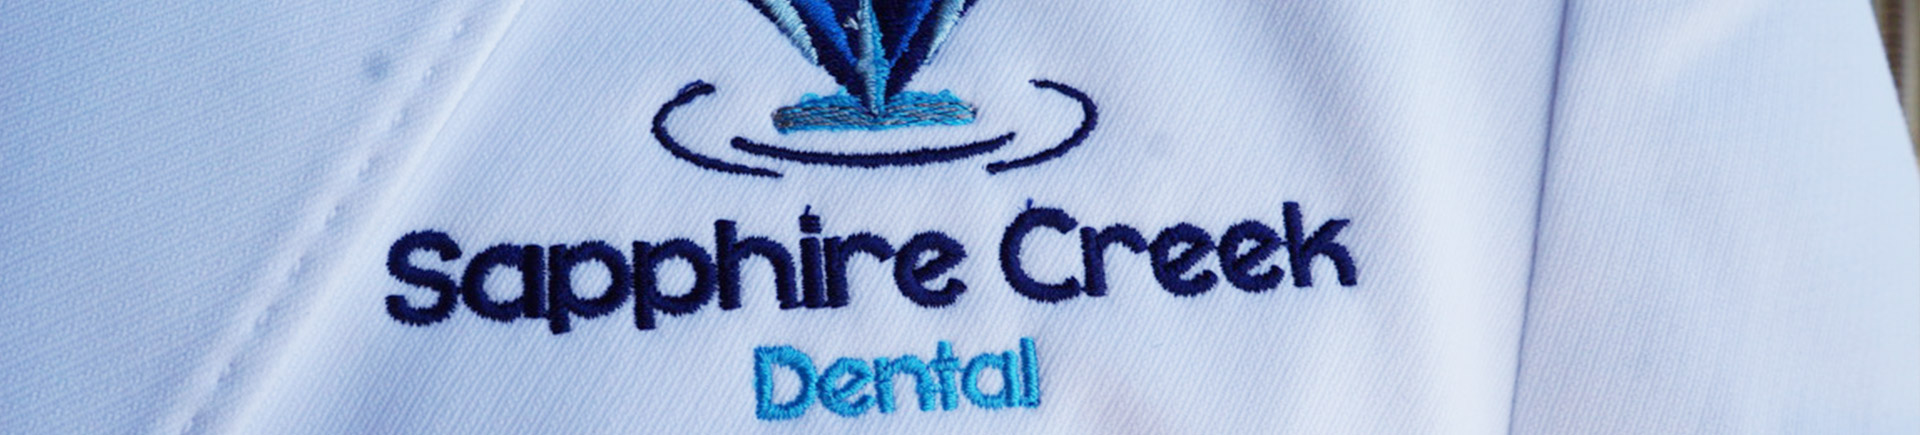 Visit the Dentist Before Your Annual Insurance Benefits Expire New Braunfels, TX